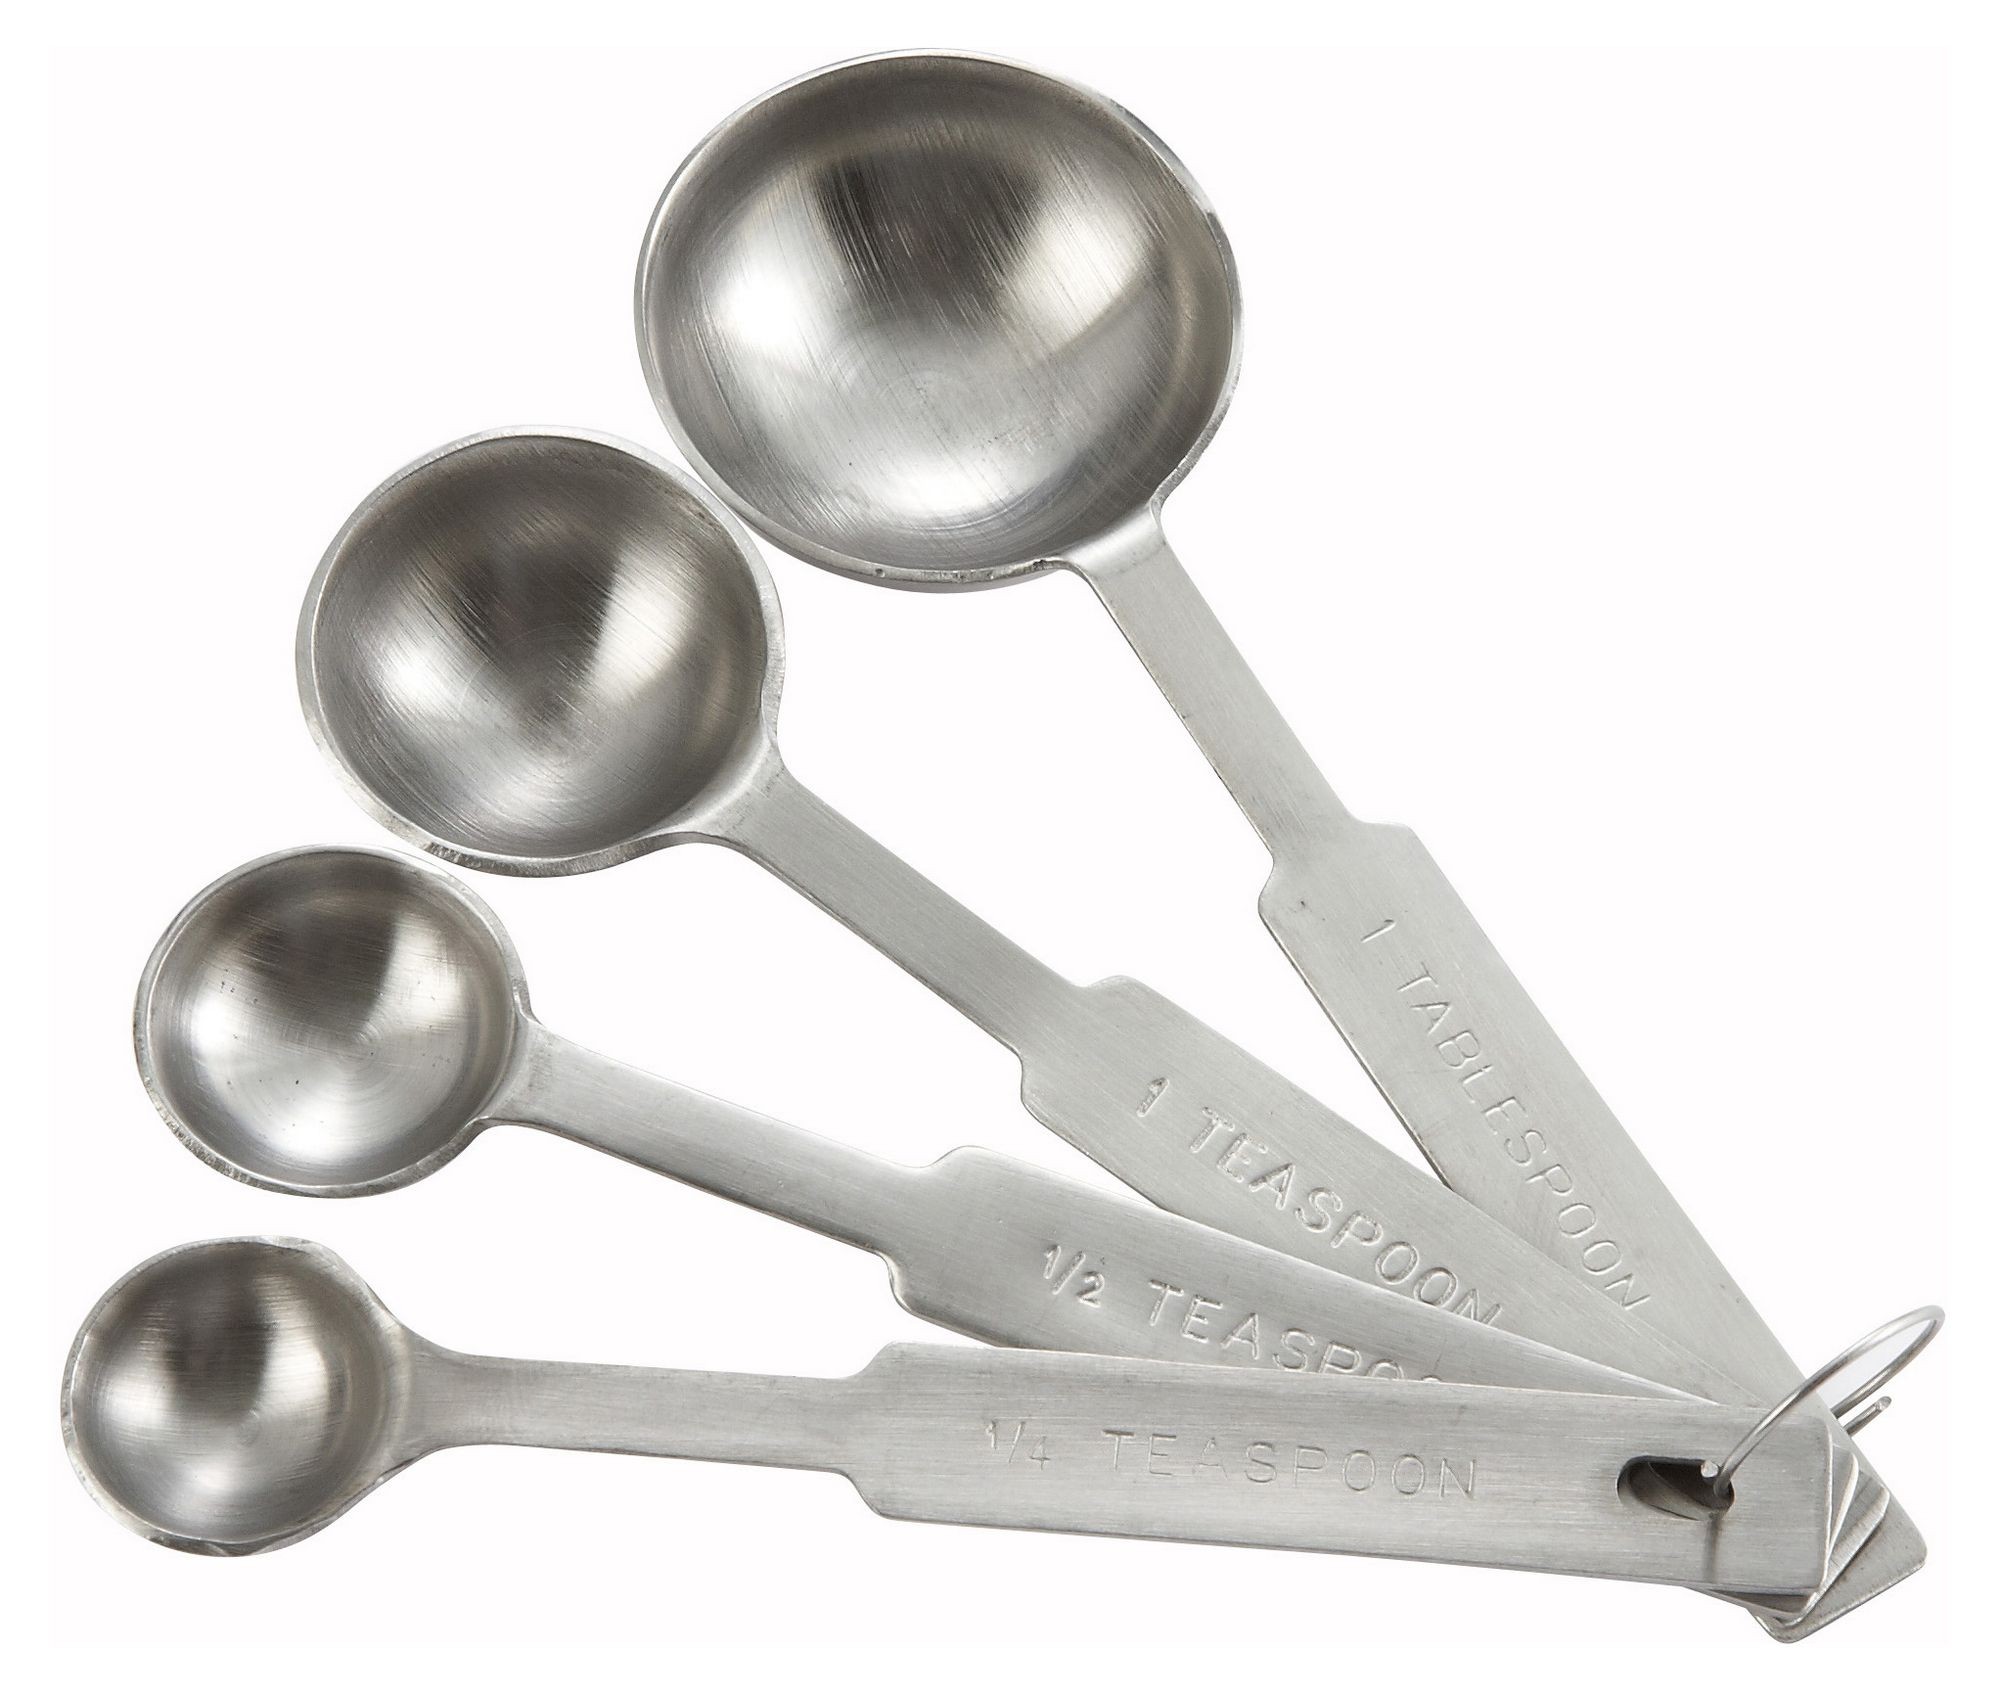 Winco MSPD-4X 4-Piece Deluxe Stainless Steel Measuring Spoon Set